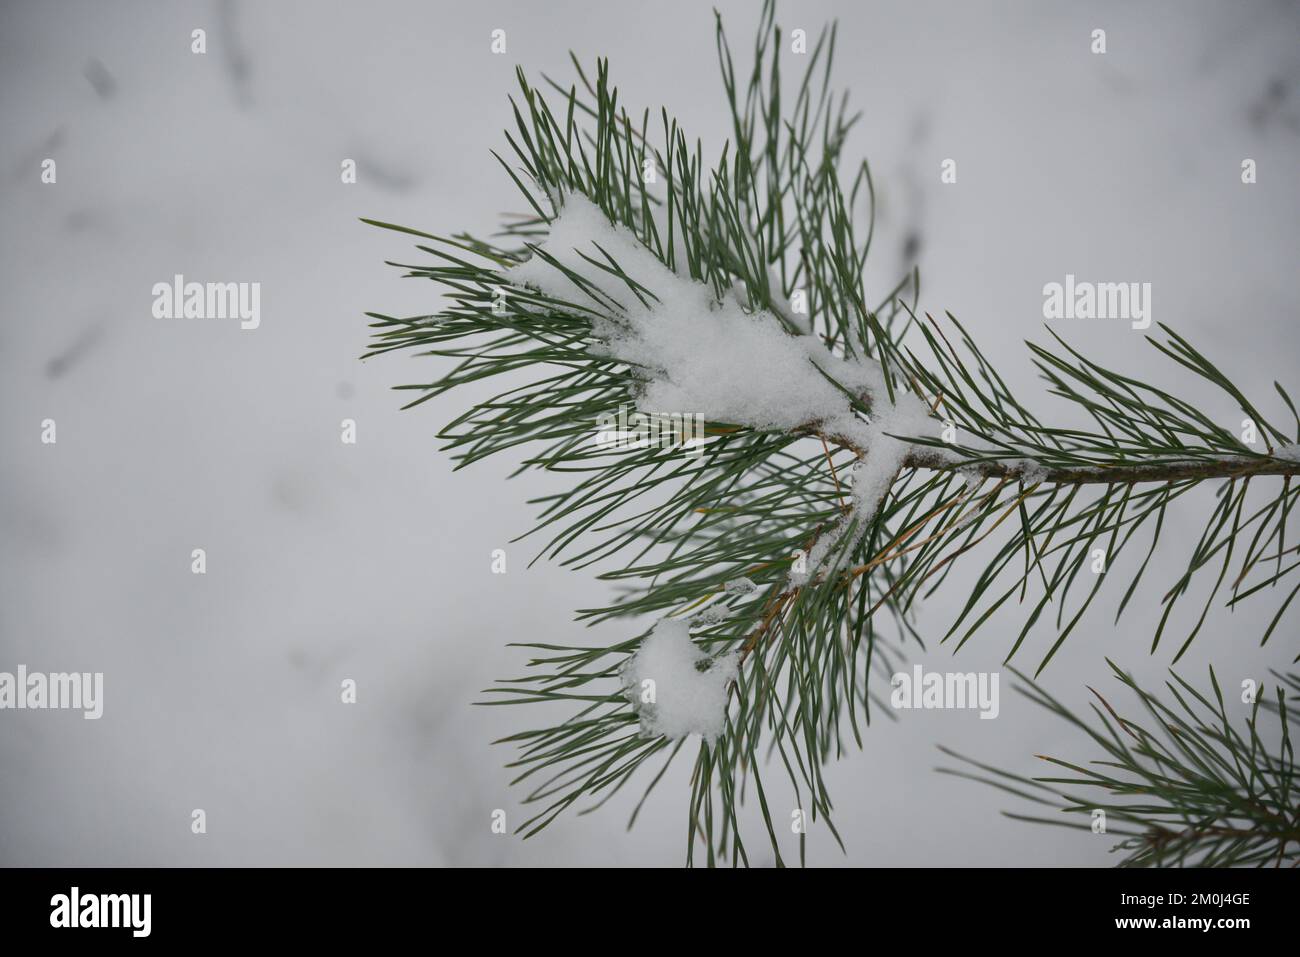 Christmas Background with beautiful green pine tree brunch close up. Copy space. Stock Photo